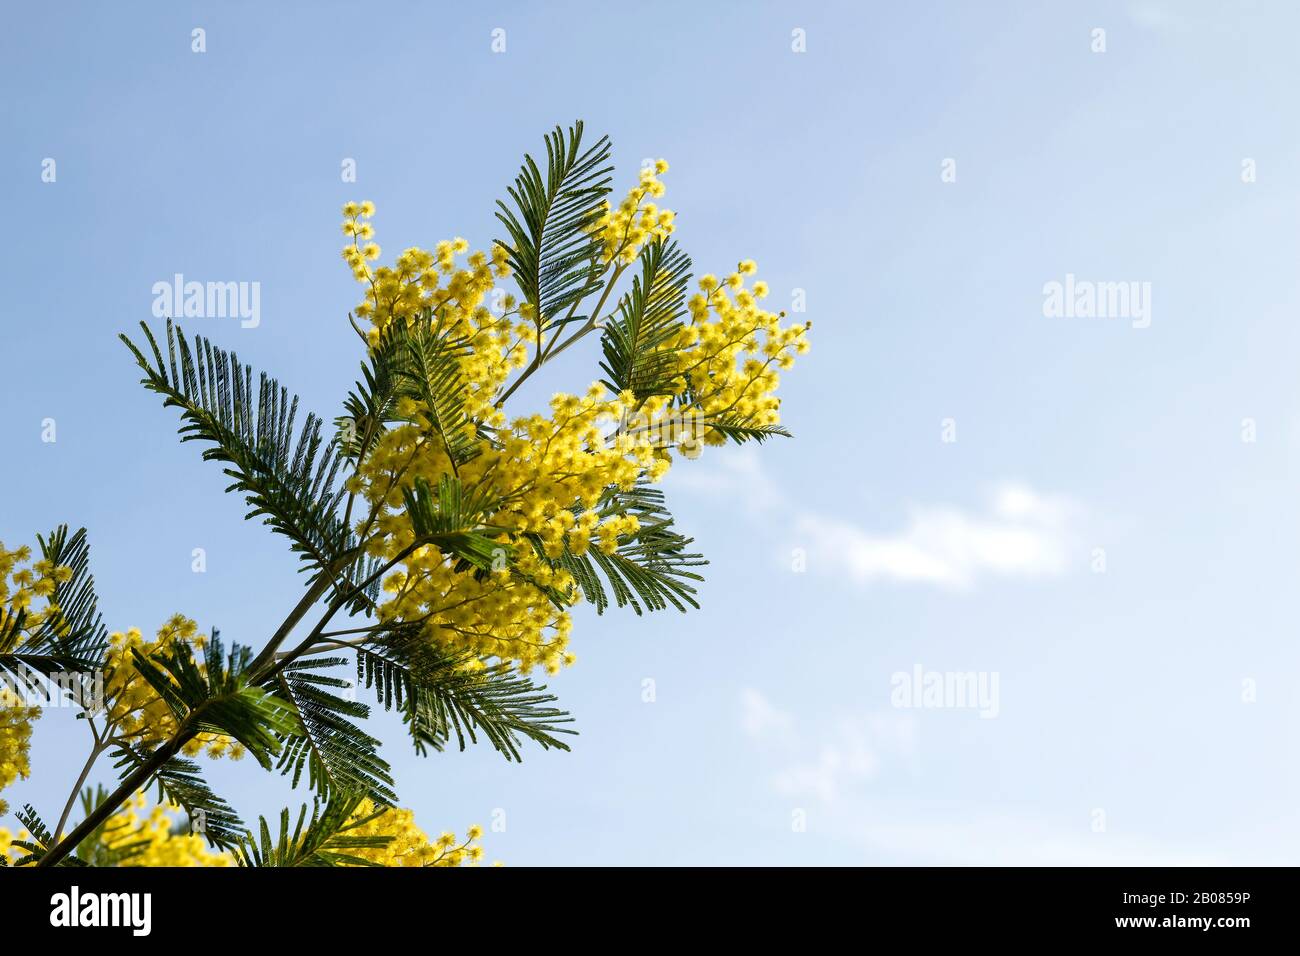 Blossoming acacia dealbata with yellow flowers and green leaves Stock Photo